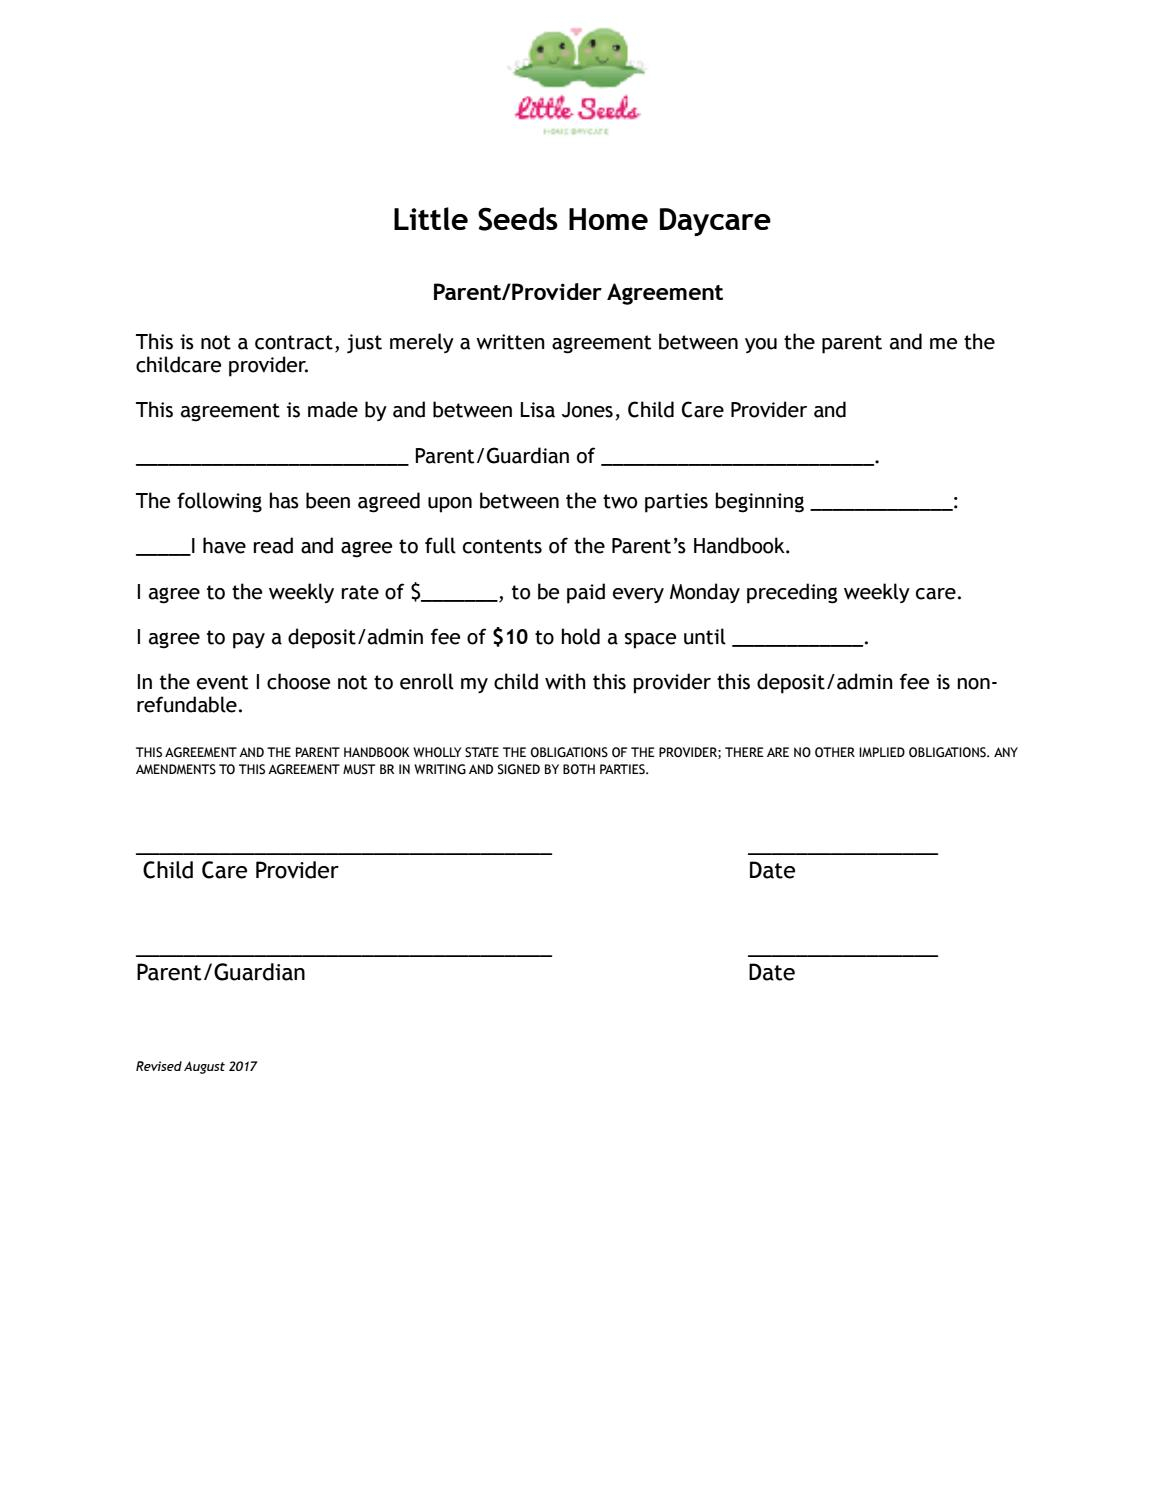 Parent Child Care Provider Agreement Daycare Agreement Little Seeds Home Daycare Issuu